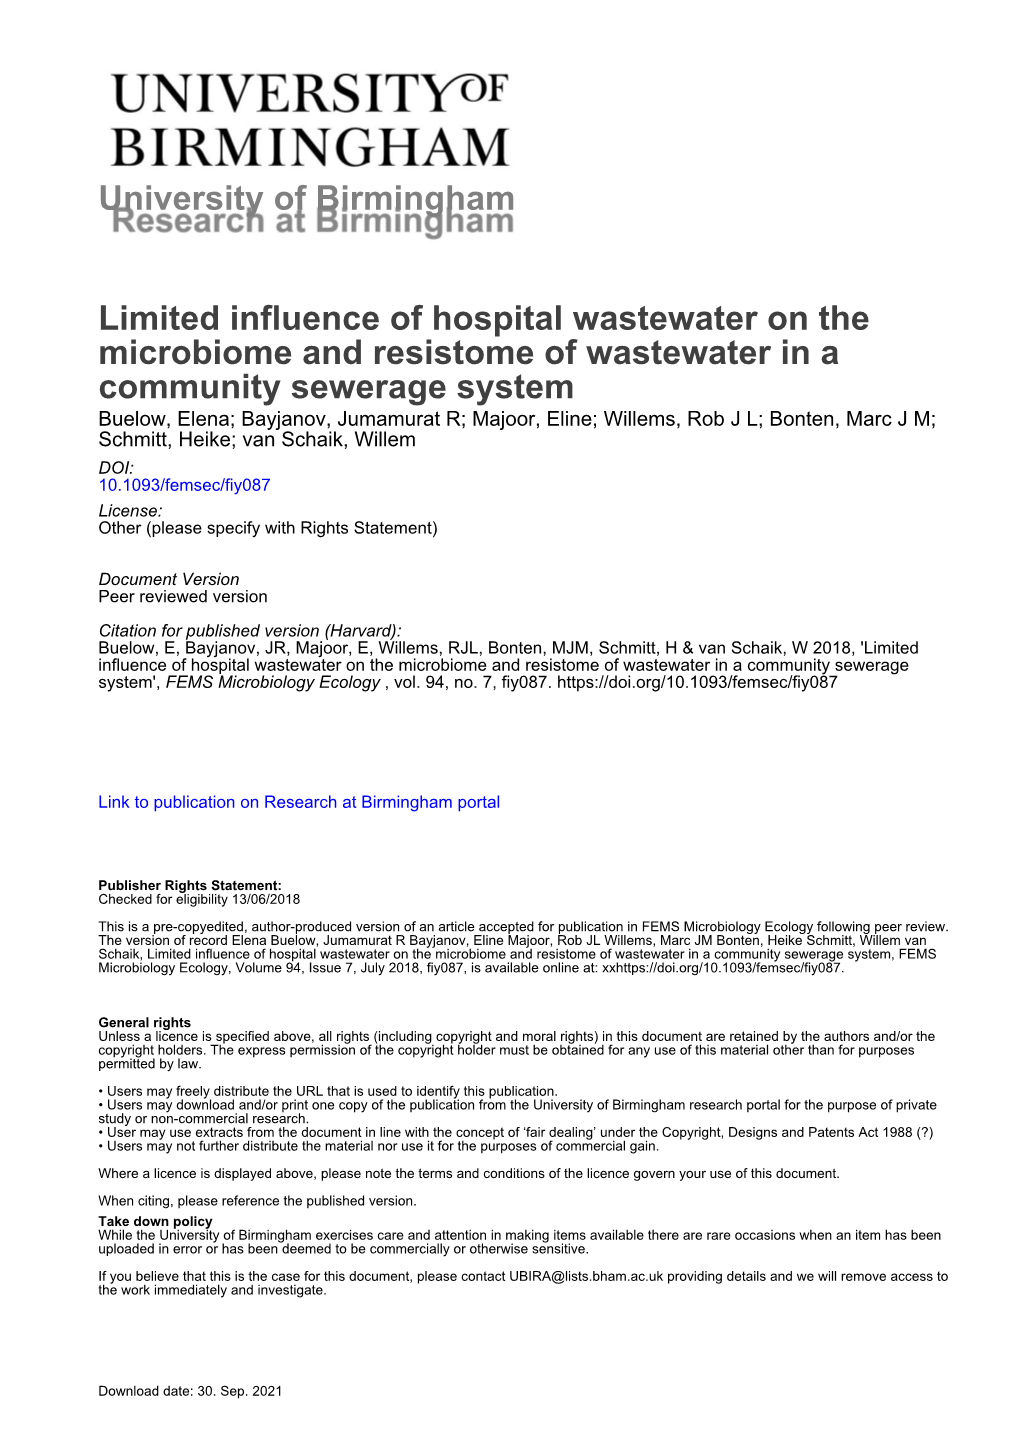 Limited Influence of Hospital Wastewater on the Microbiome And